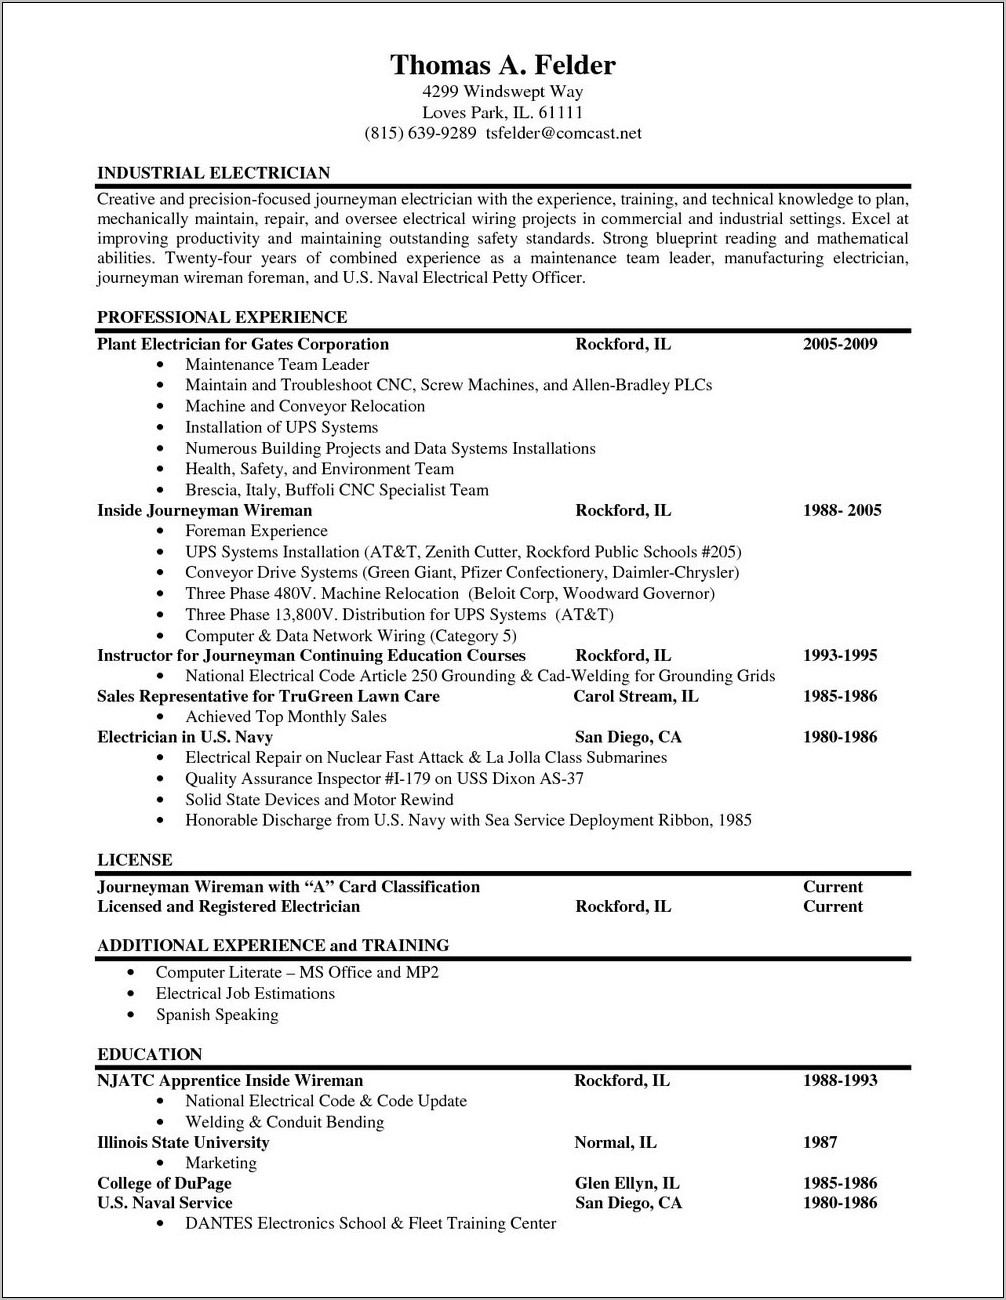 Sample Resume For Electrician In India